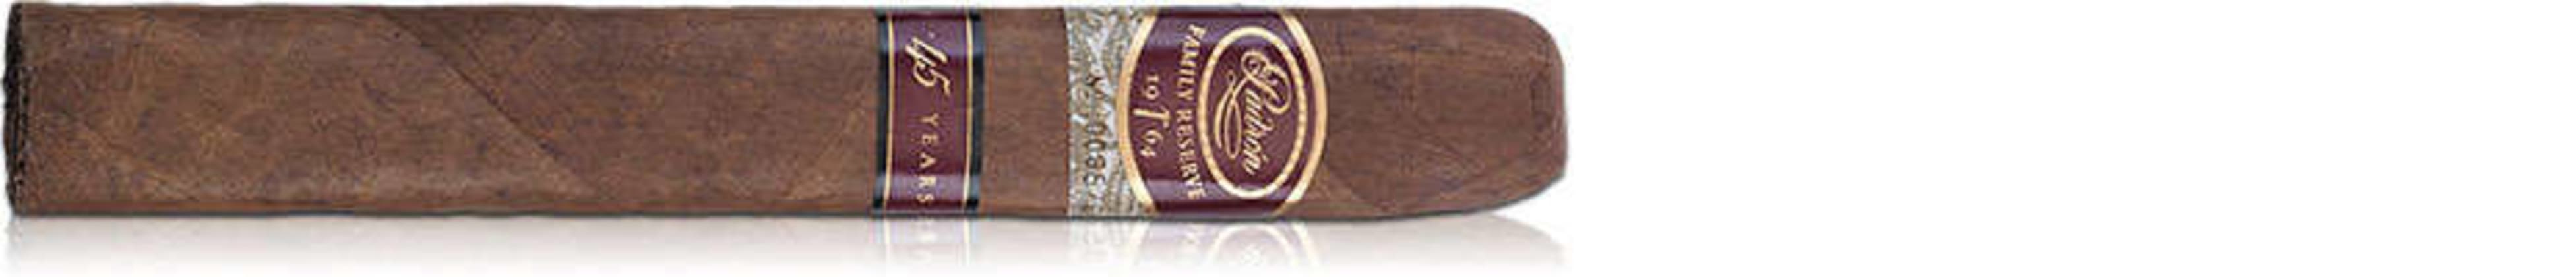 Padron Family Reserve 45 Years Single